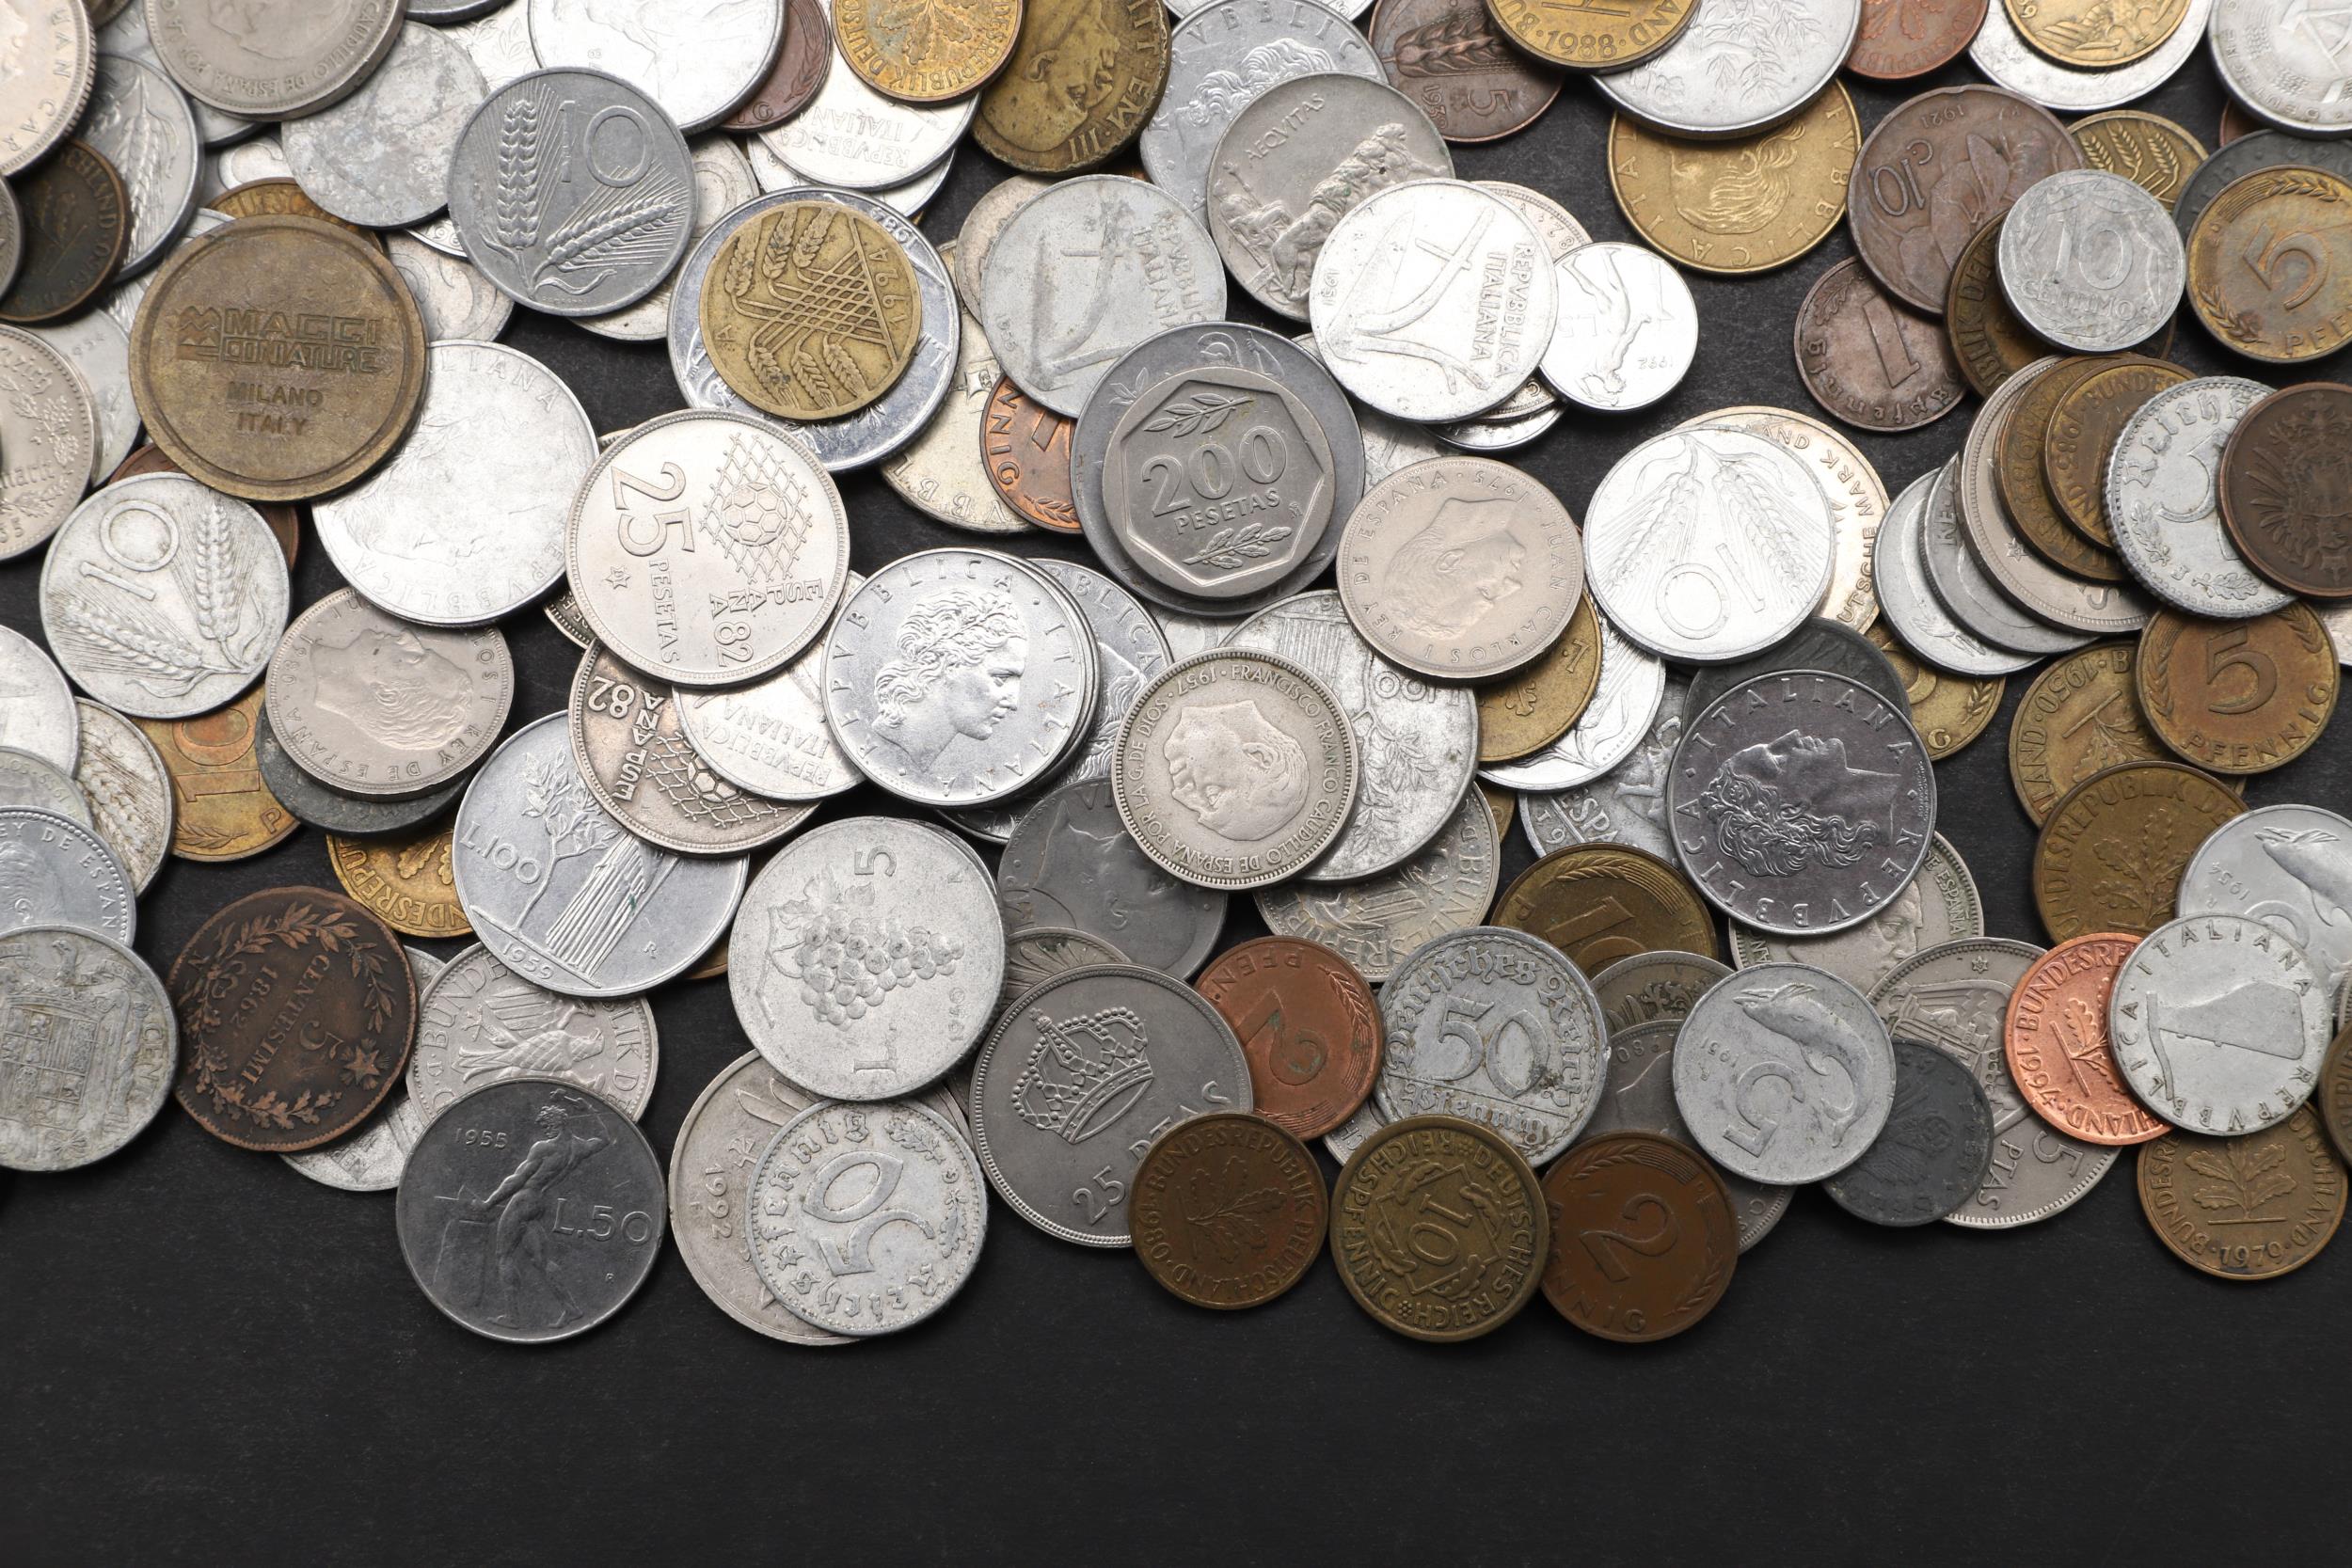 A LARGE COLLECTION OF 19TH AND 20th CENTURY EUROPEAN COINS TO INCLUDE GERMANY, SPAIN AND ITALY. - Image 9 of 10